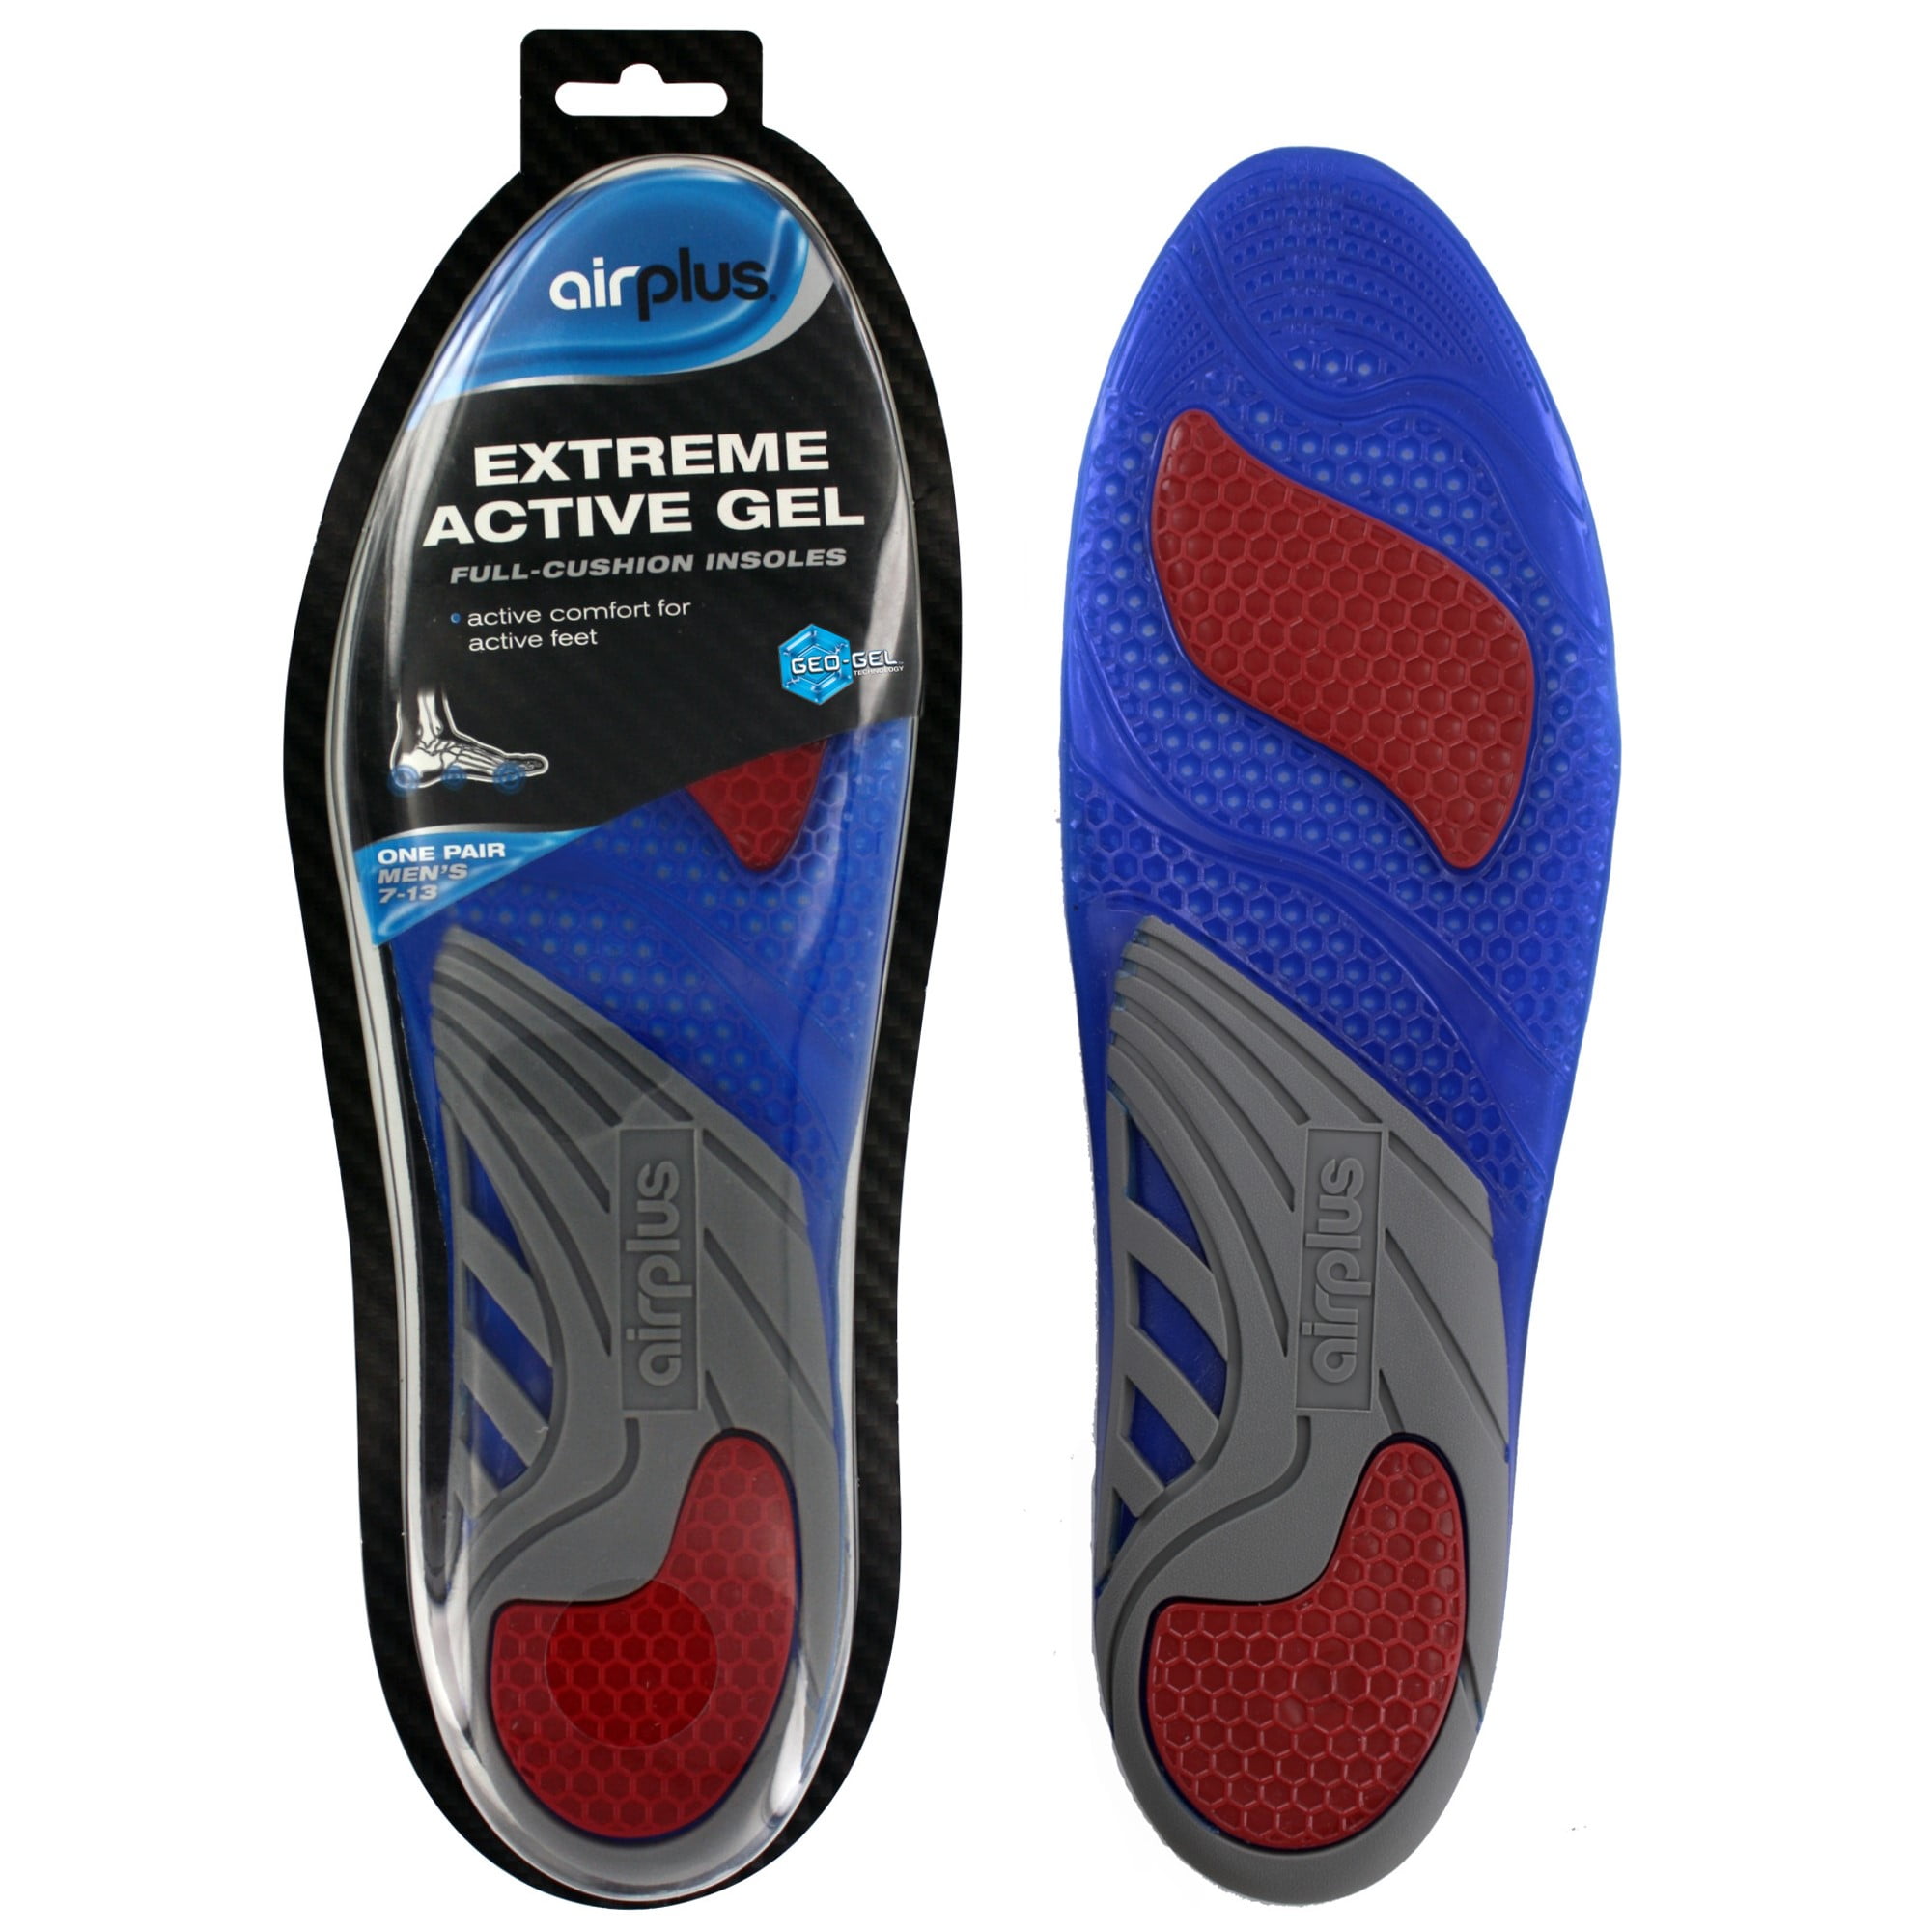 Rock Fall Activ-Step Anti-Fatigue Comfort Footbed Insole For Shoes & Work Boots 